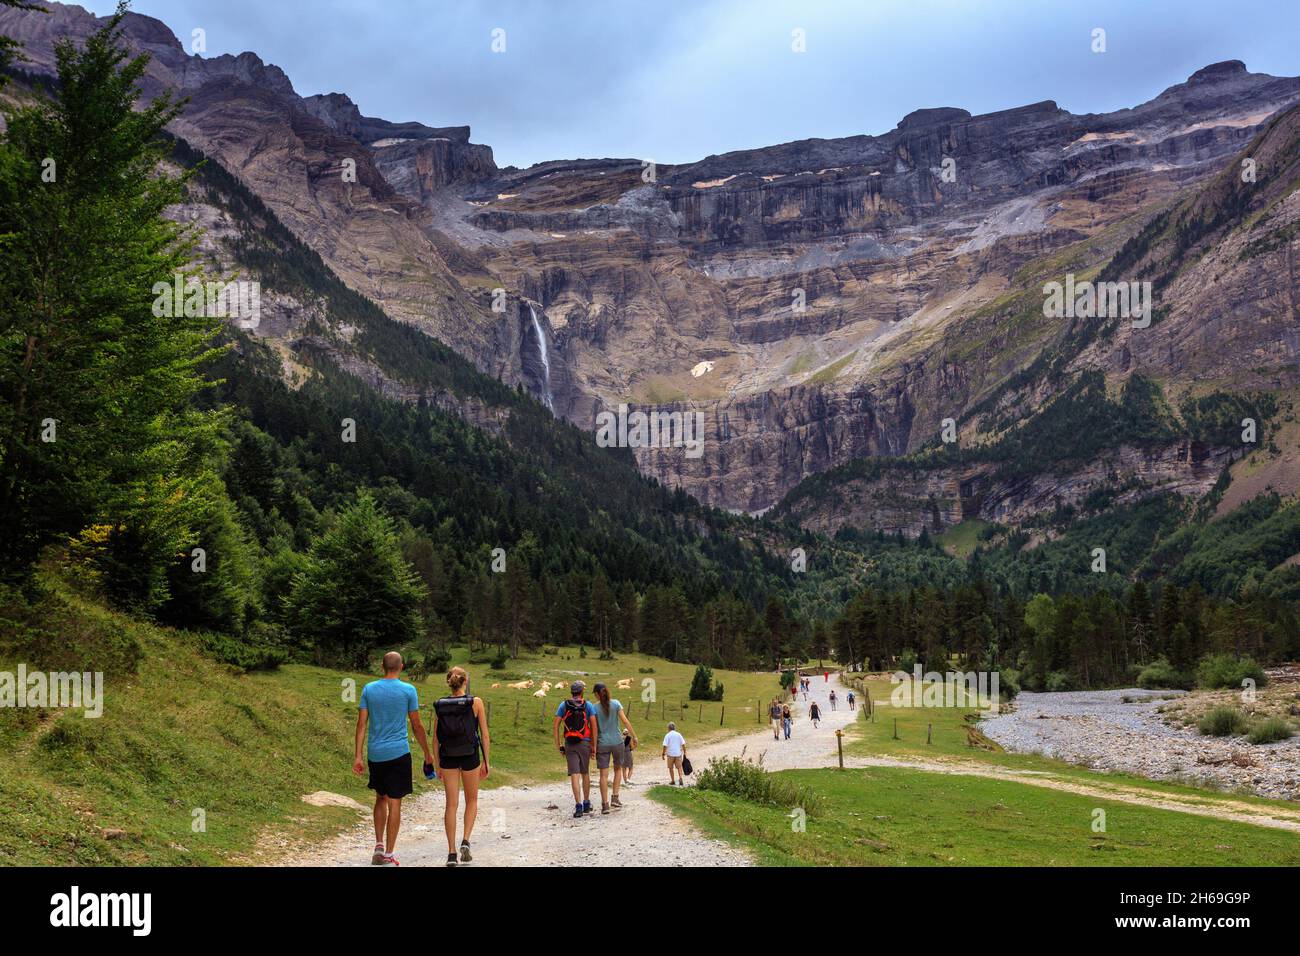 Hikers walk in the Cirque de Gavarnie in the French Pyrenees National Park, a UNESCO World Heritage Site. The Cirque was shape by a glacier. Stock Photo